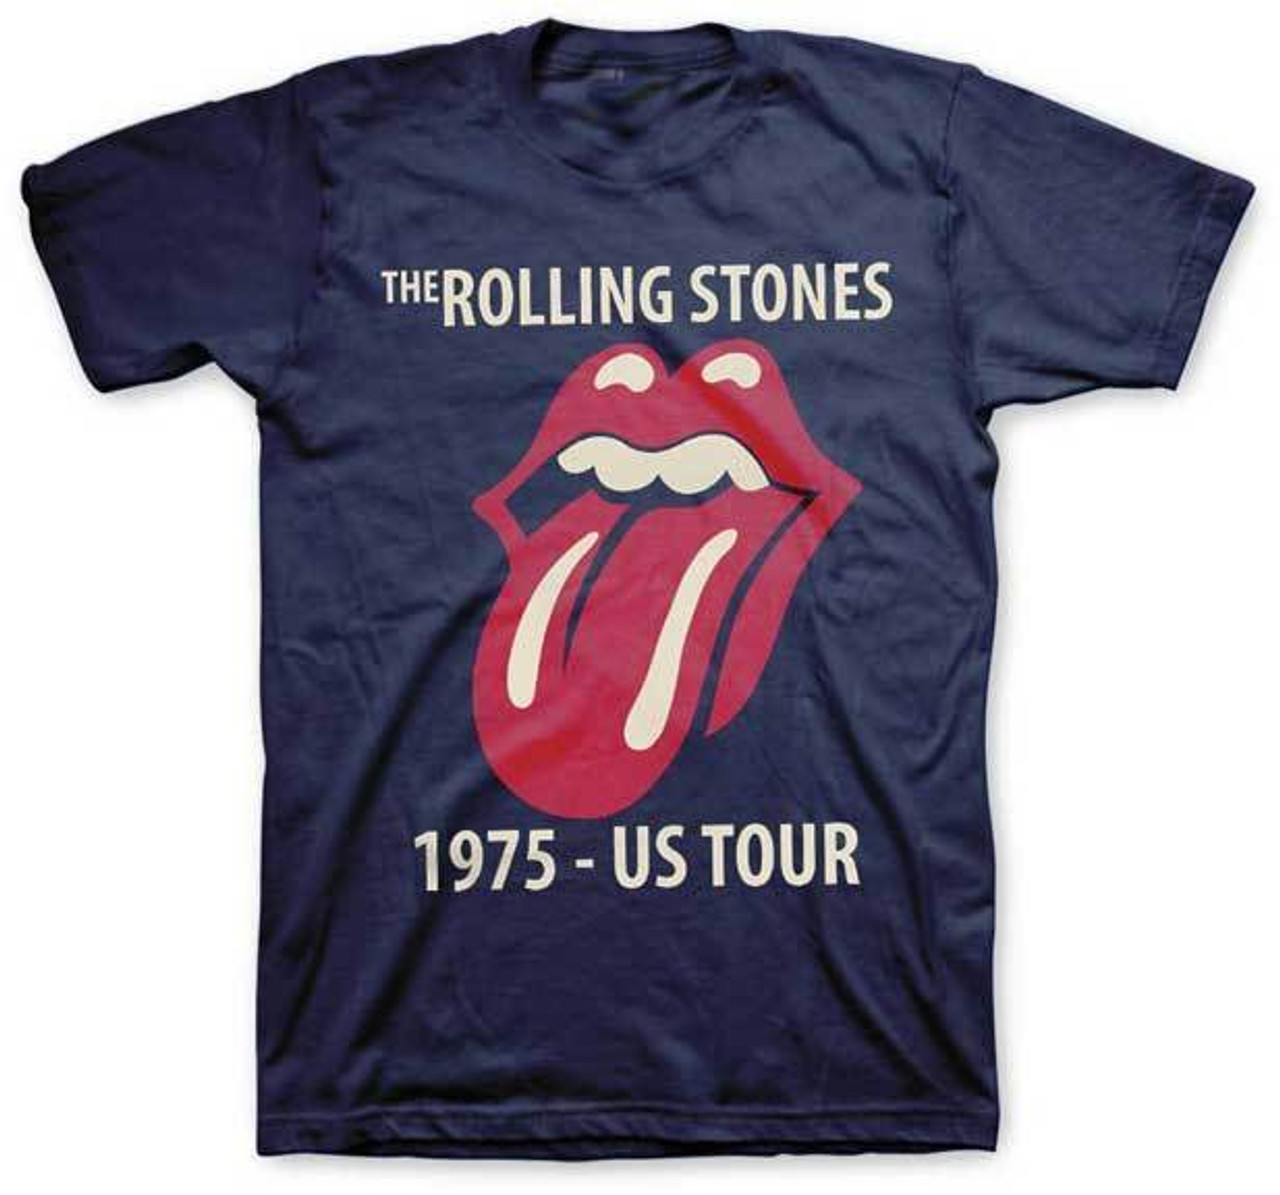 The Rolling Stones Classic Tour 1975 75 Navy Music Rock Adult Mens T ...